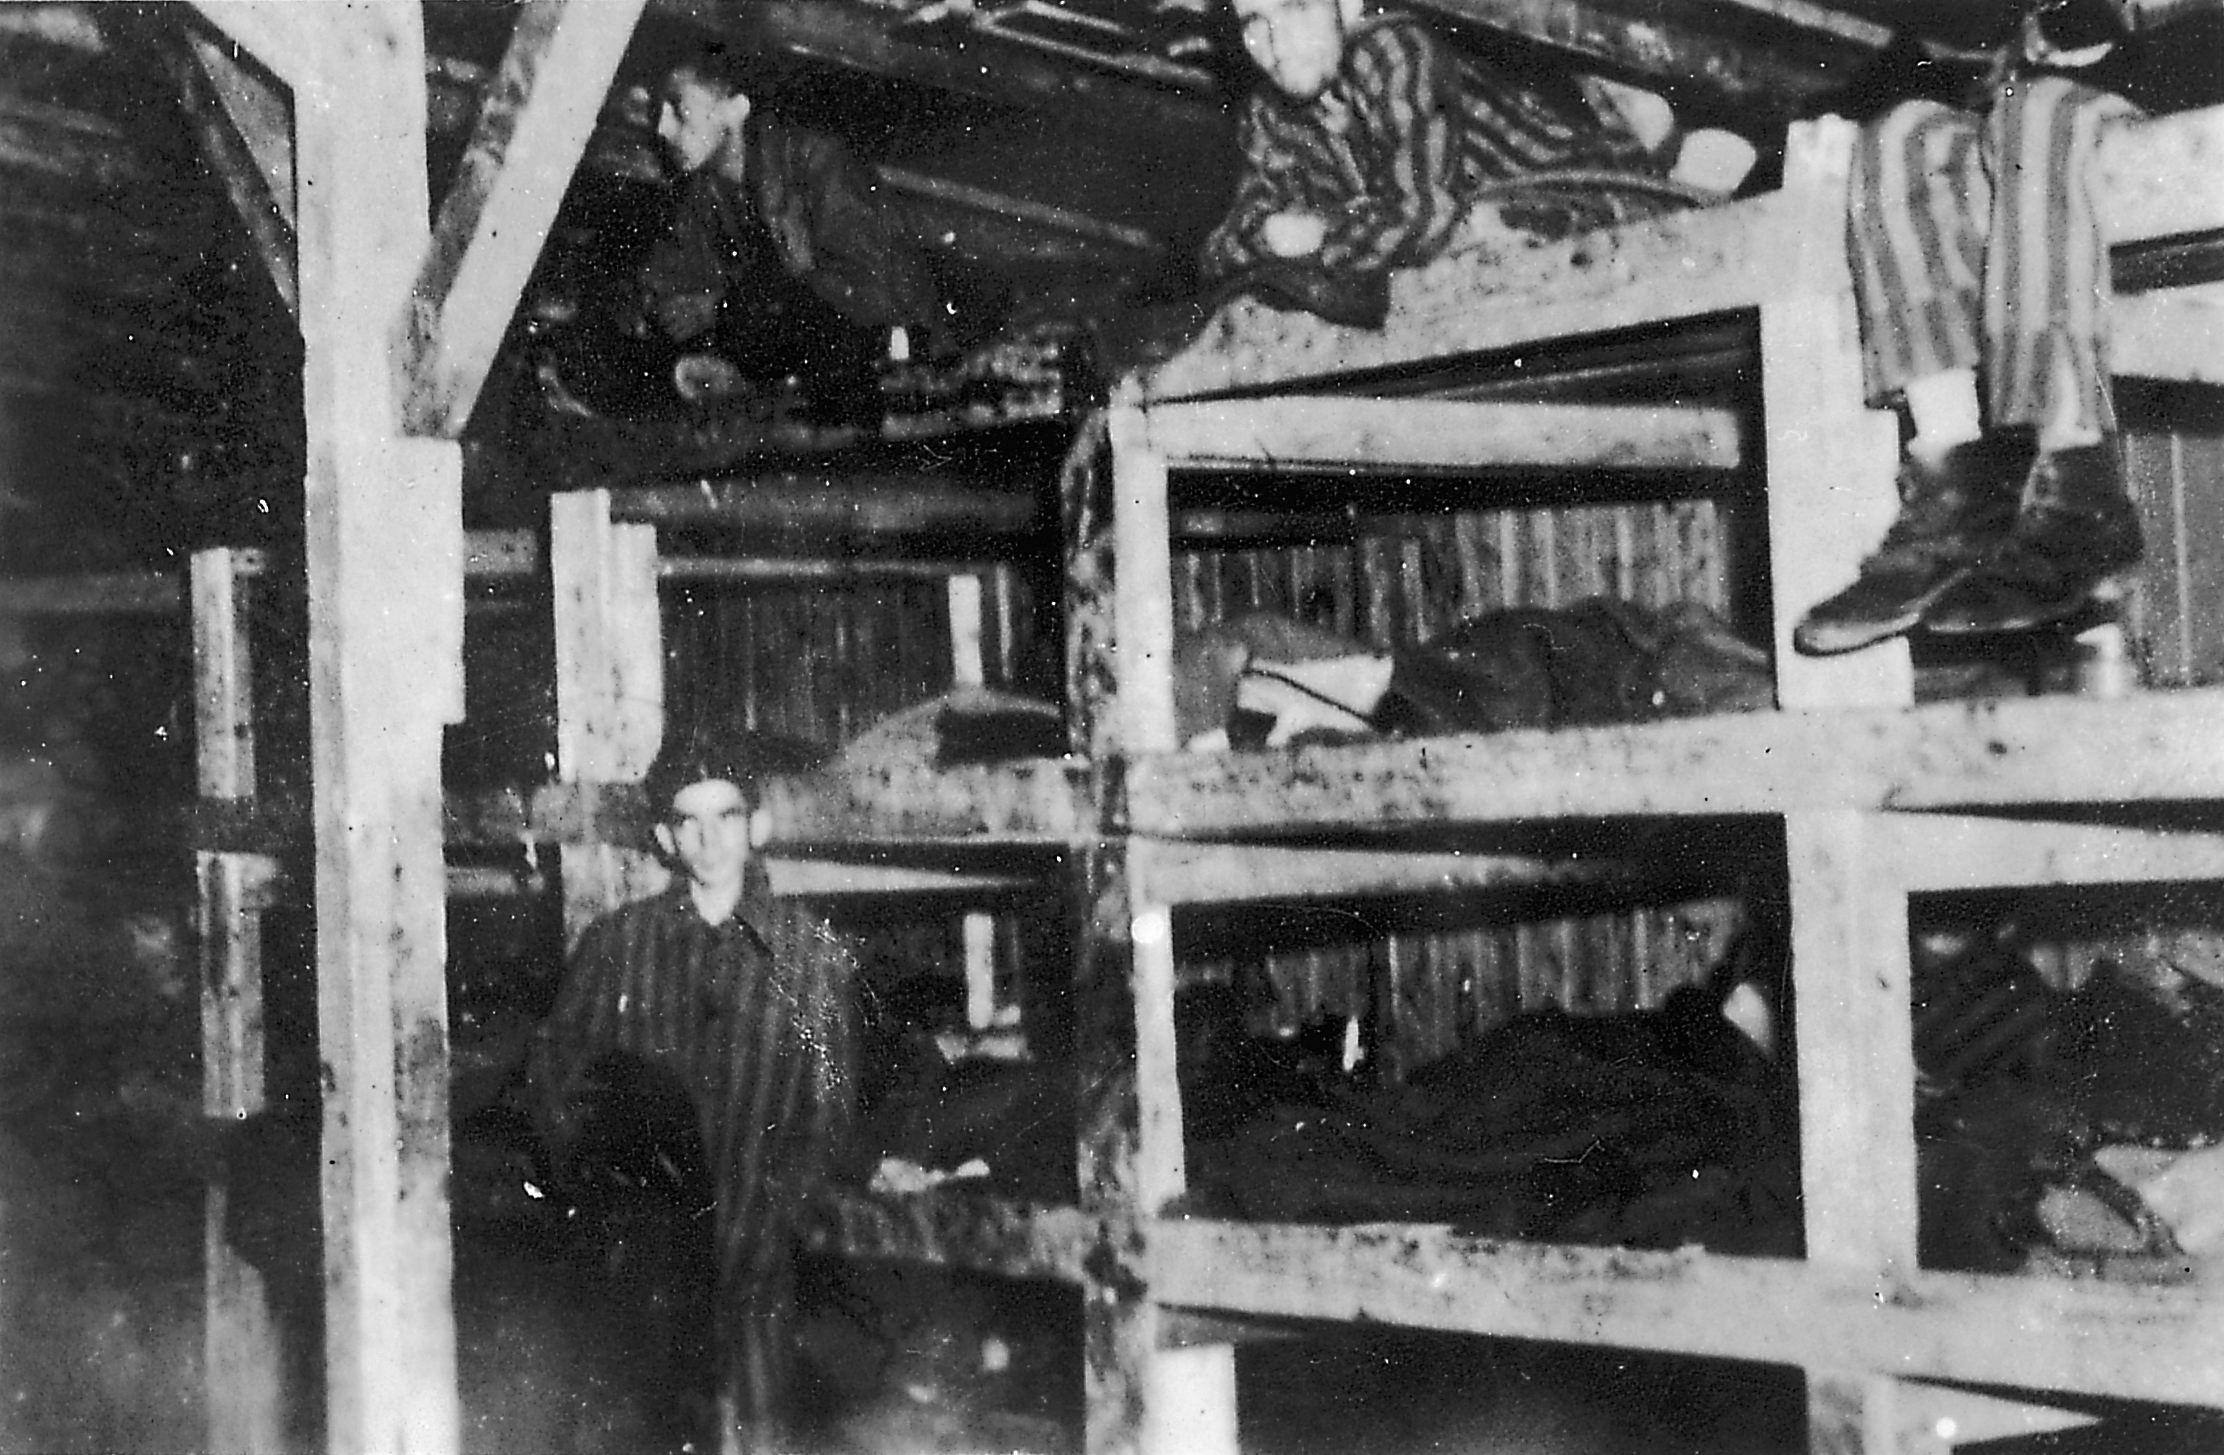 The liberation of the Nazi camp of Buchenwald on April 16, 1945